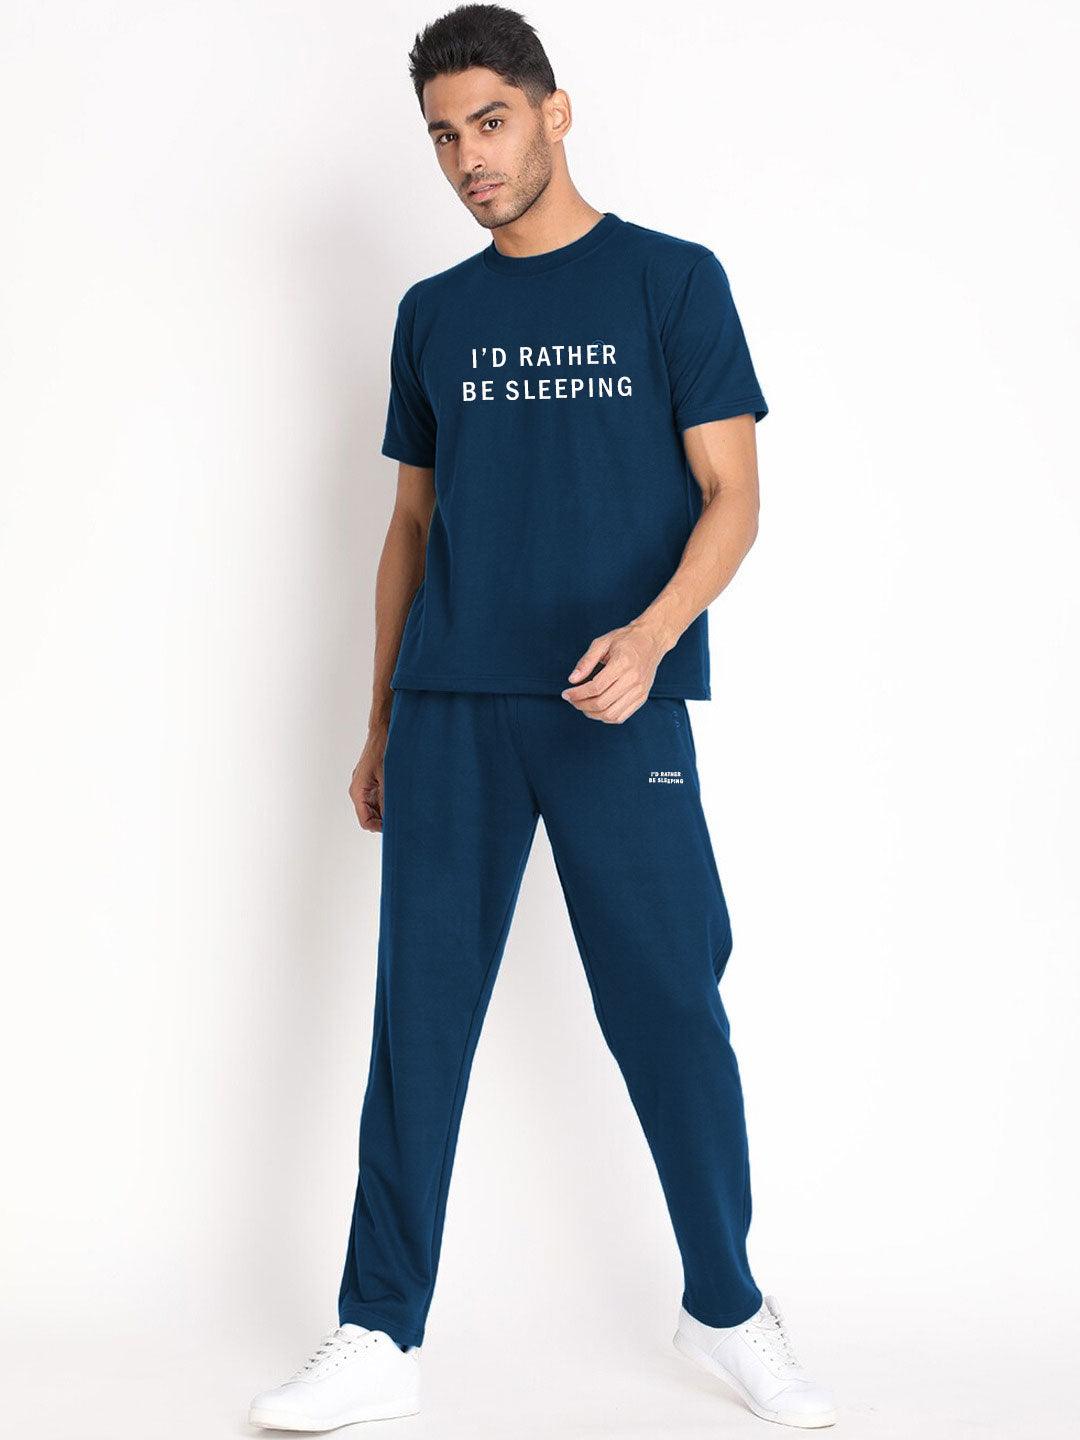 Men Fitted Track Suits in Nevy Blue Colour - Aadhitri